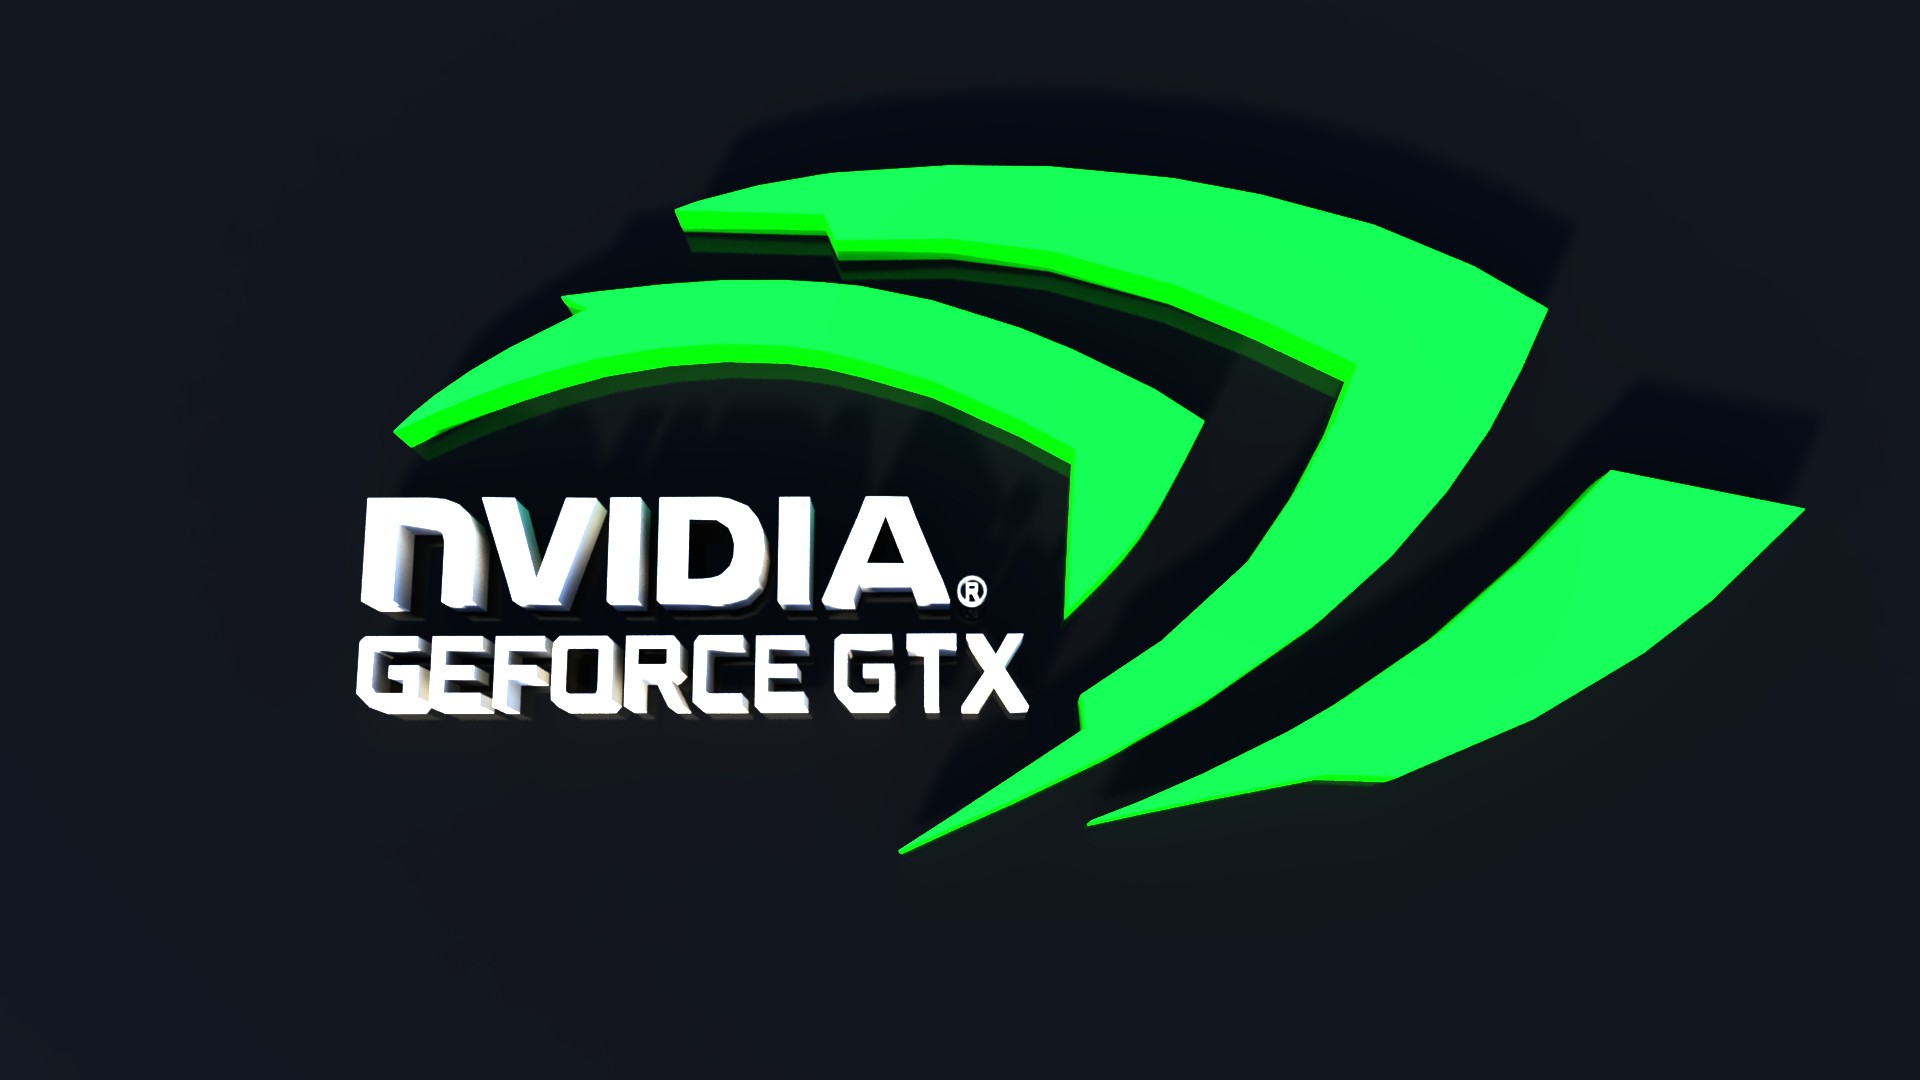 Nvidia, Nvidia GTX Wallpapers HD / Desktop and Mobile Backgrounds